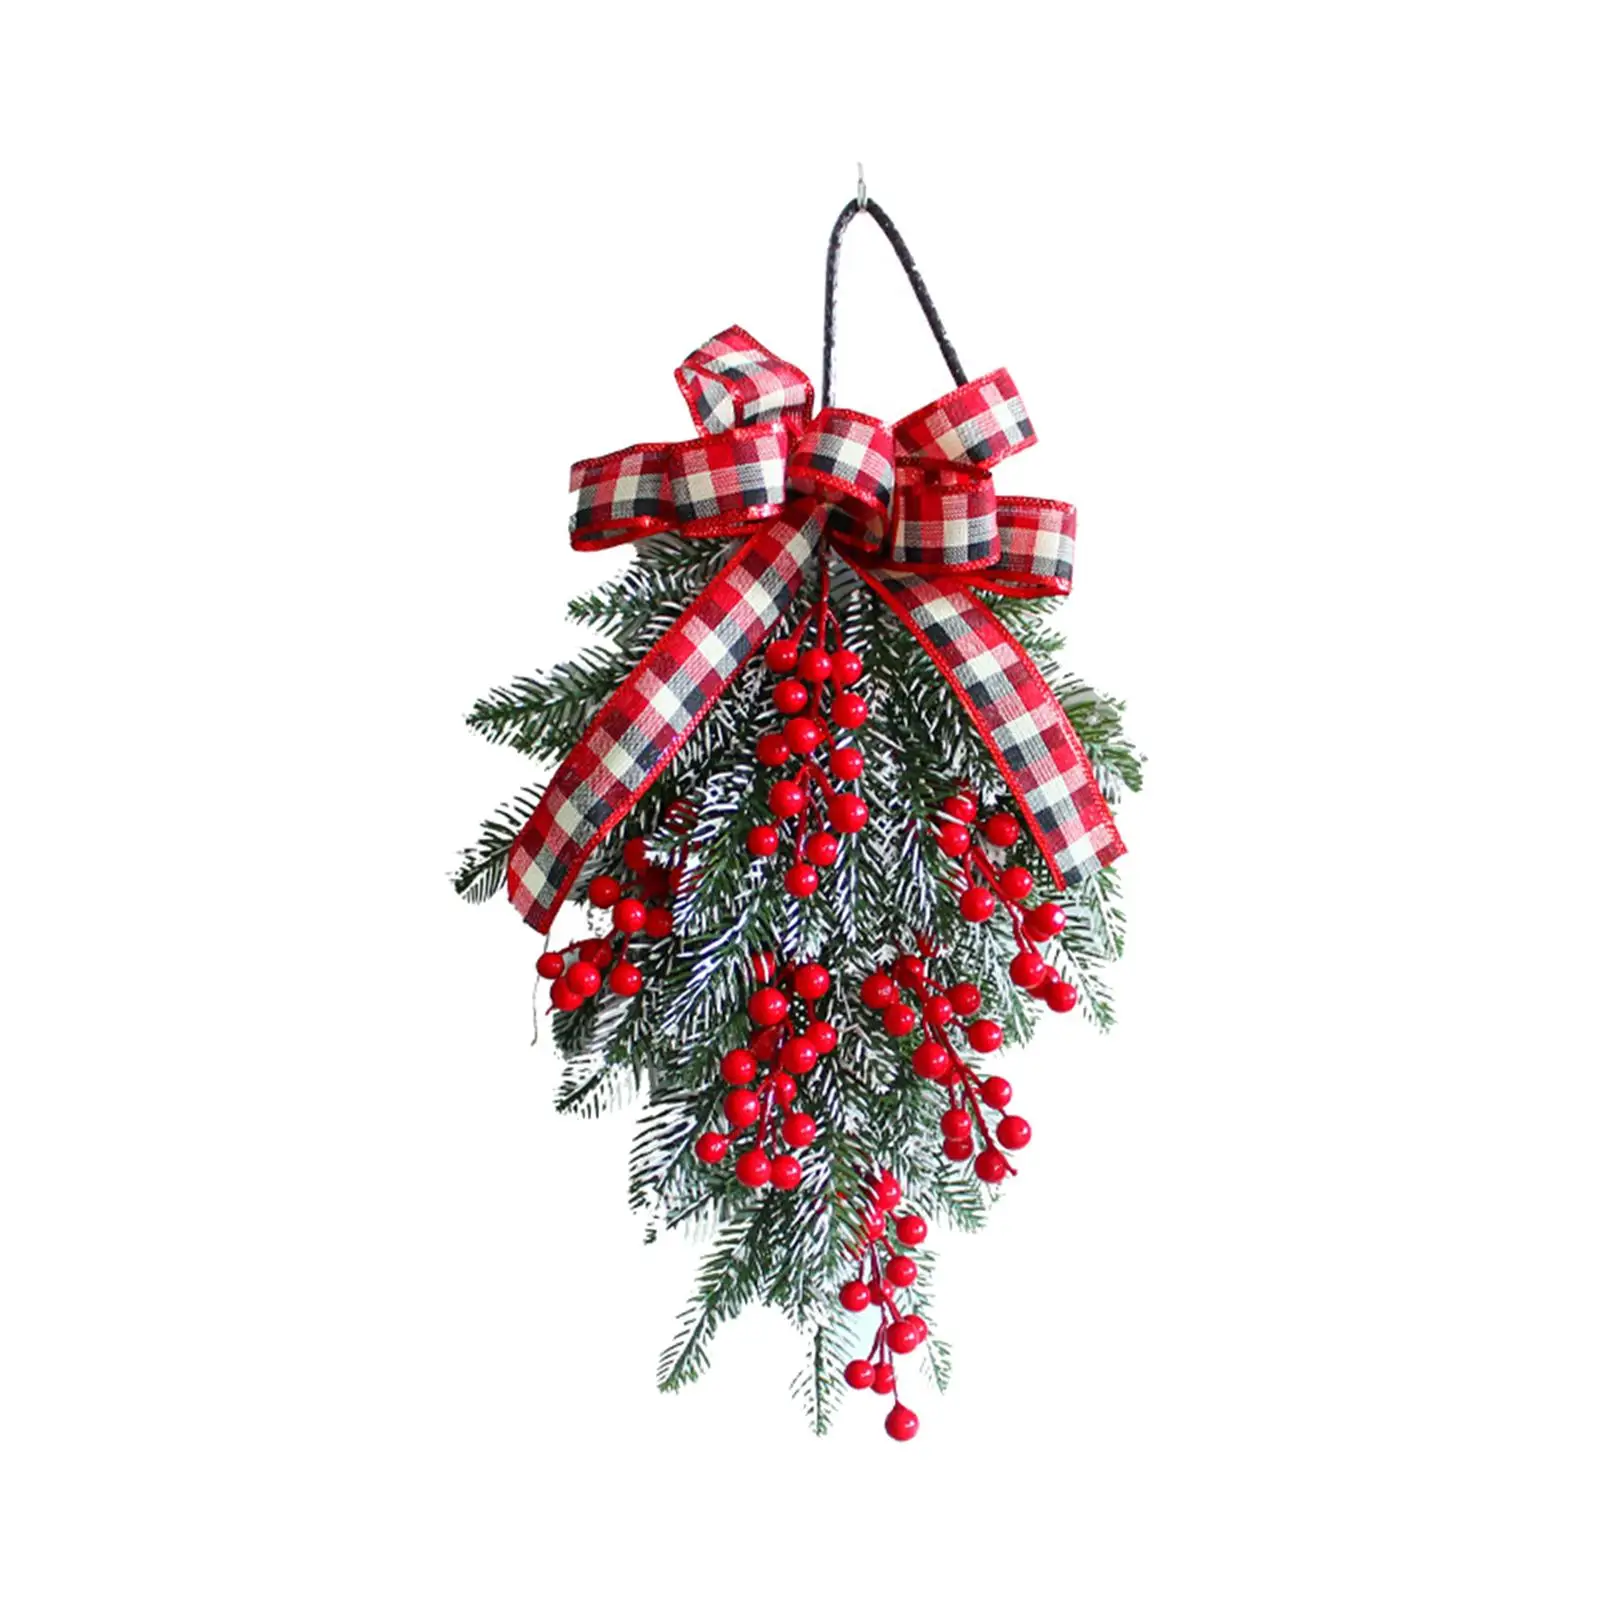 Mini Christmas Tree Wreath Wall Hanging Branches Door Decoration Garland Ornament for Indoor Outdoor Gift Home Decor Party